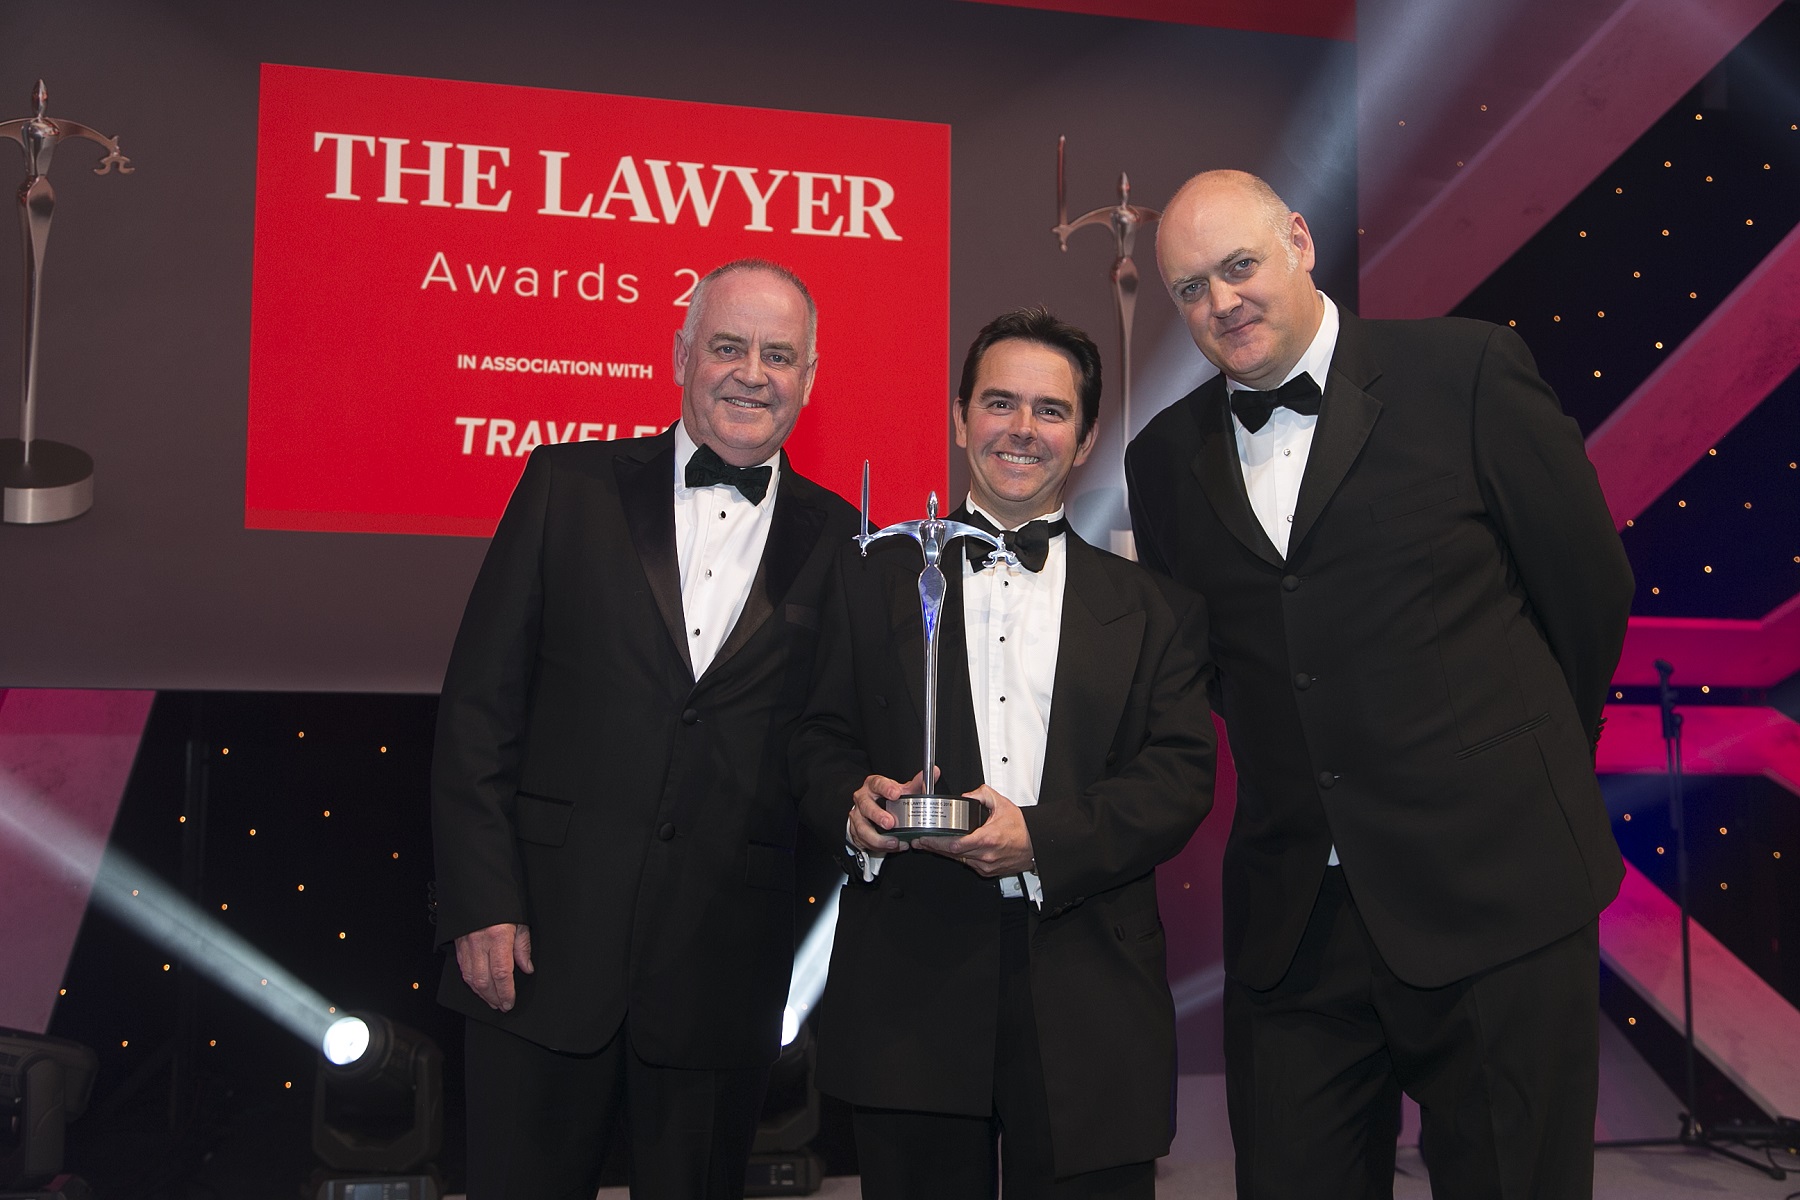 Coveted Lawyer Award wins for two Bristol firms and city’s Legal Advocacy Support Project